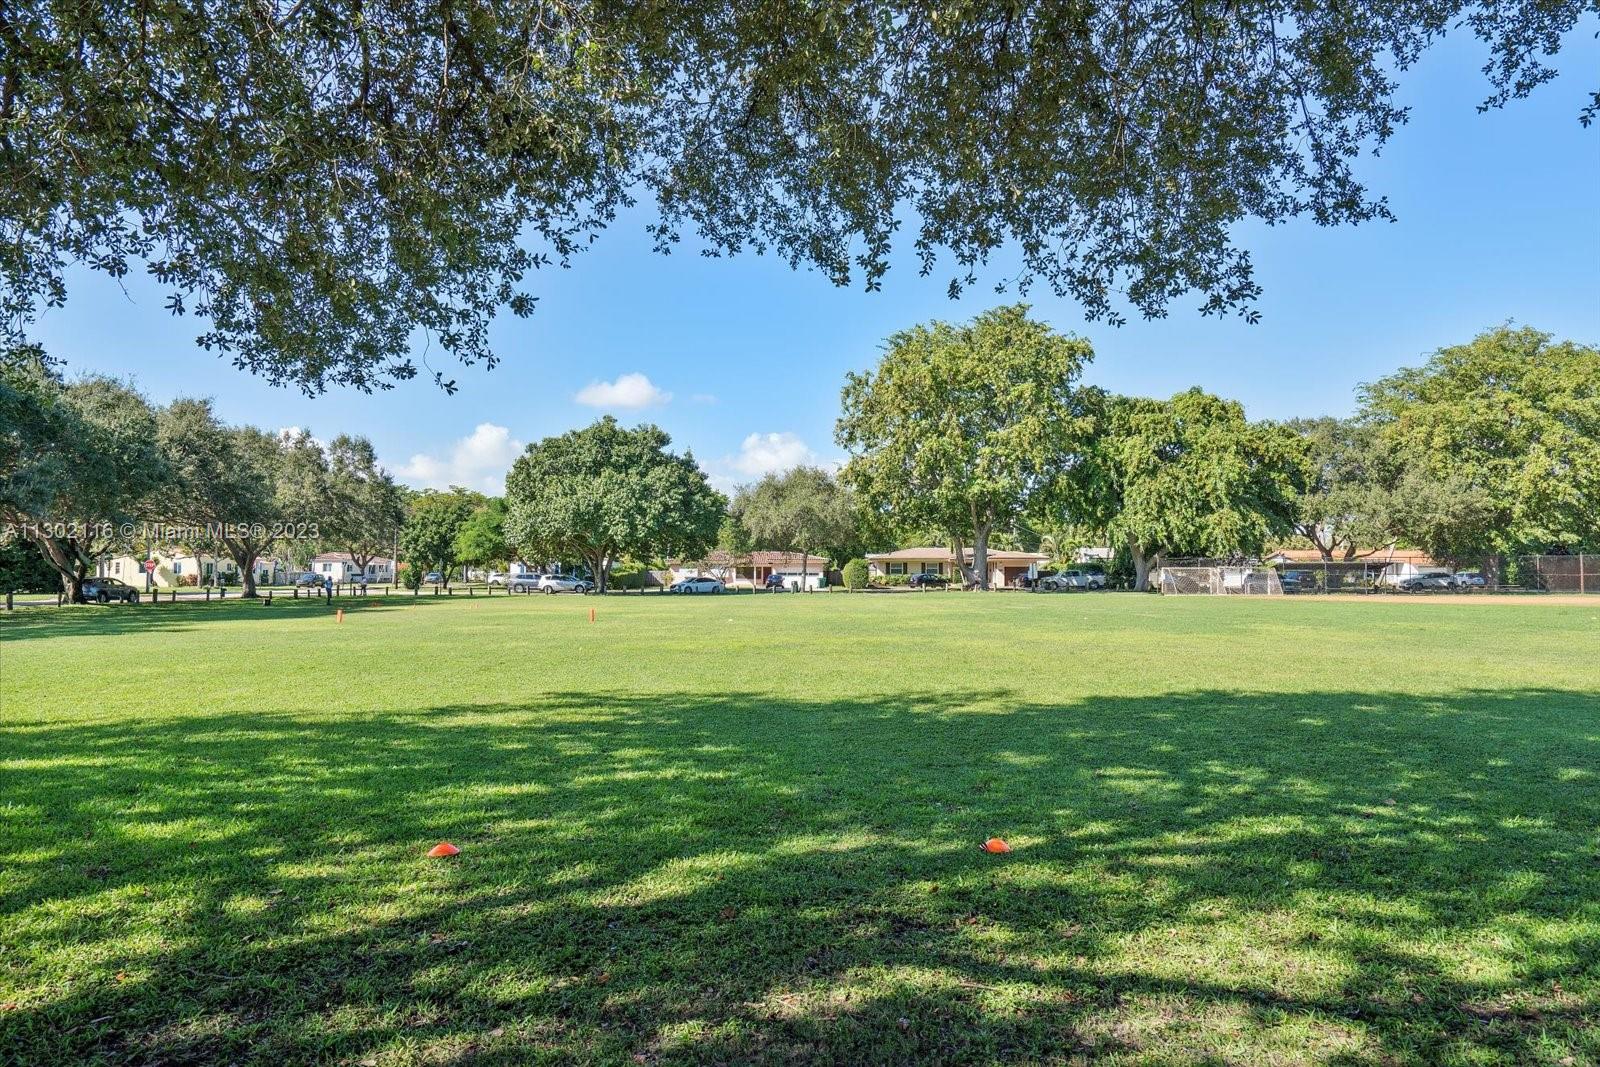 Recreation field across the street from the home